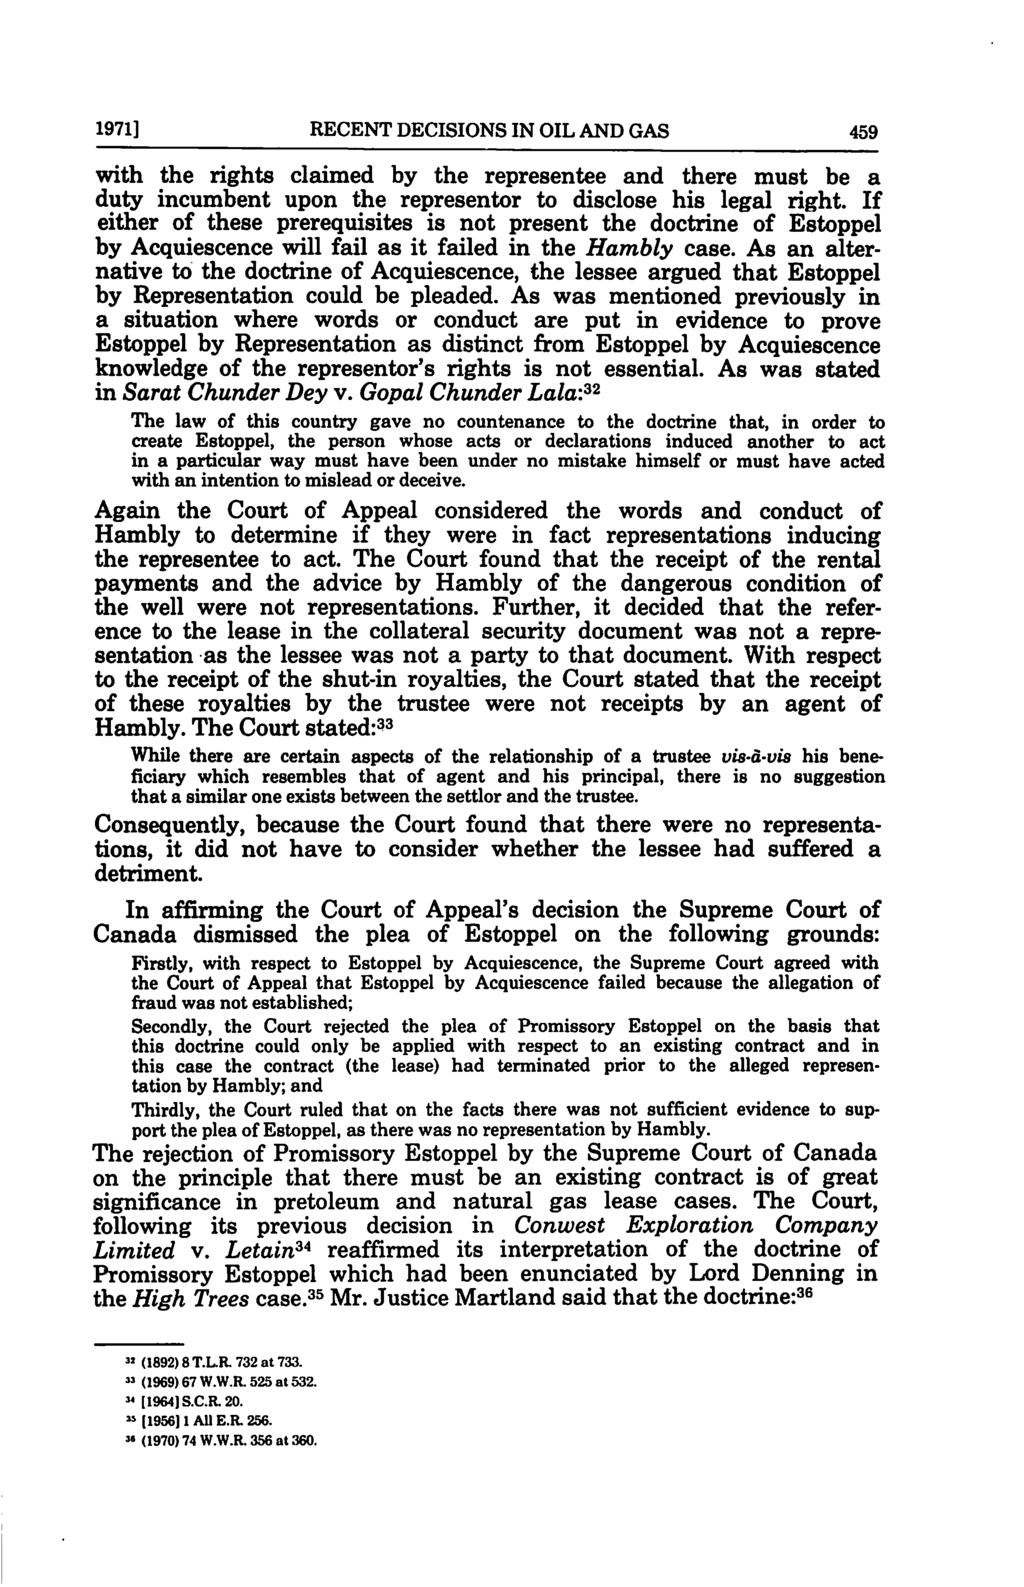 1971] RECENT DECISIONS IN OIL AND GAS 459 with the rights claimed by the representee and there must be a duty incumbent upon the representor to disclose his legal right.